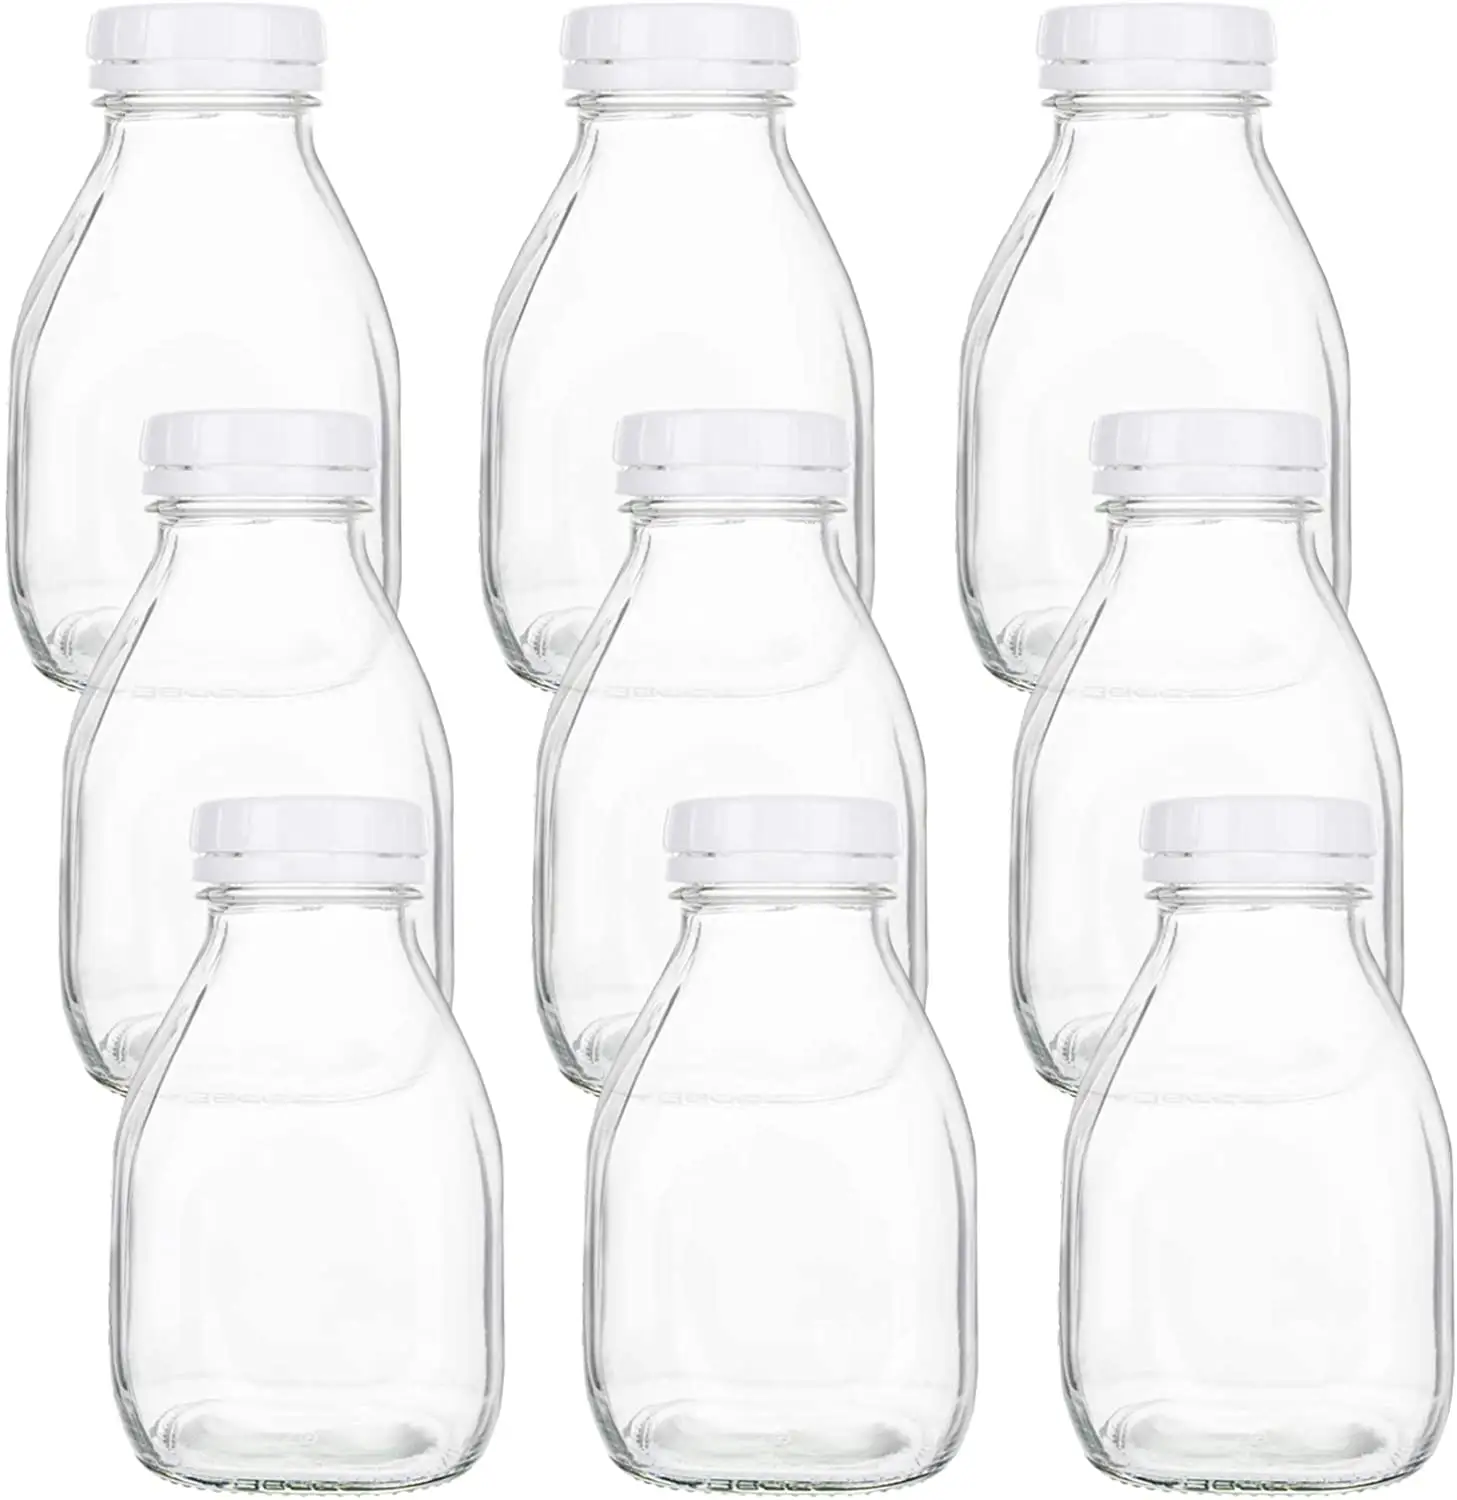 16oz Heavy Glass Milk Bottles with White Screw On Caps, Vintage Breakfast Shake Container for Beverage Glassware and Drinkware